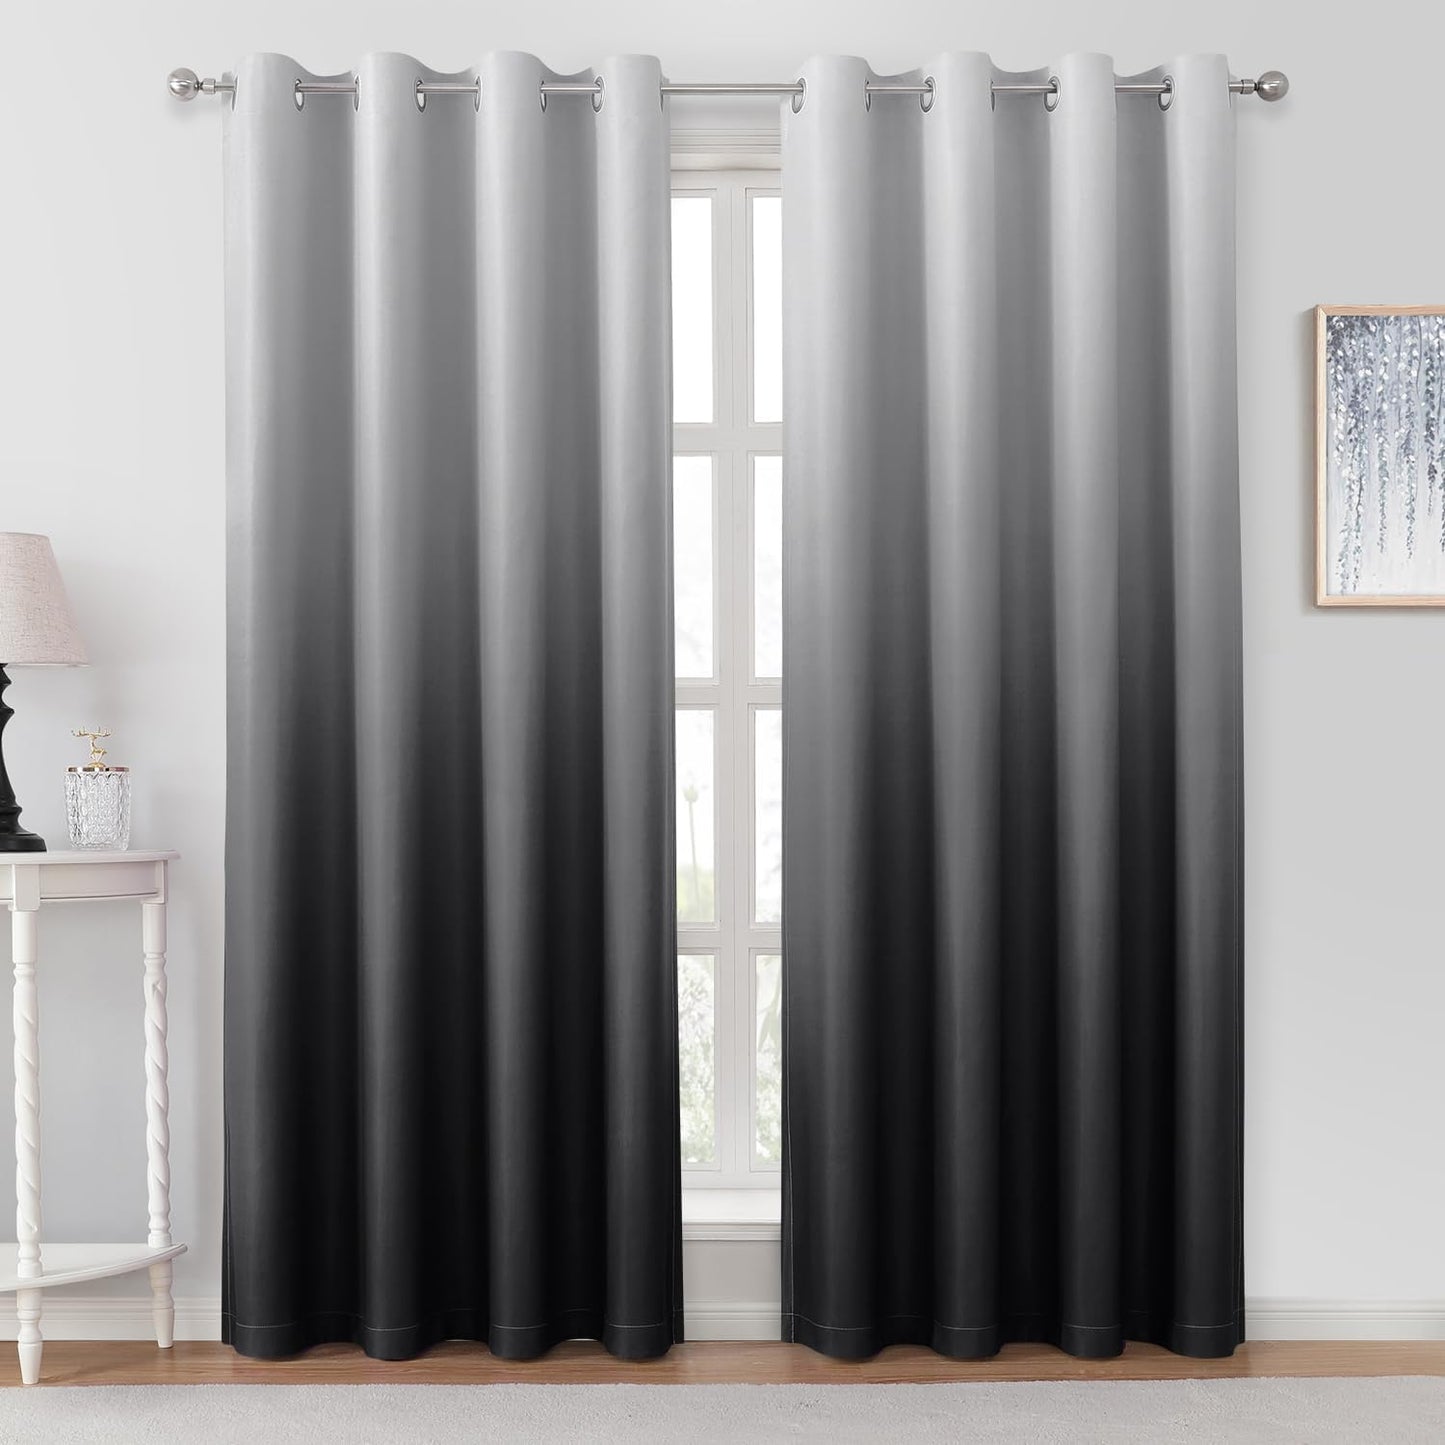 HOMEIDEAS Navy Blue Ombre Blackout Curtains 52 X 84 Inch Length Gradient Room Darkening Thermal Insulated Energy Saving Grommet 2 Panels Window Drapes for Living Room/Bedroom  HOMEIDEAS Black 52"W X 96"L 